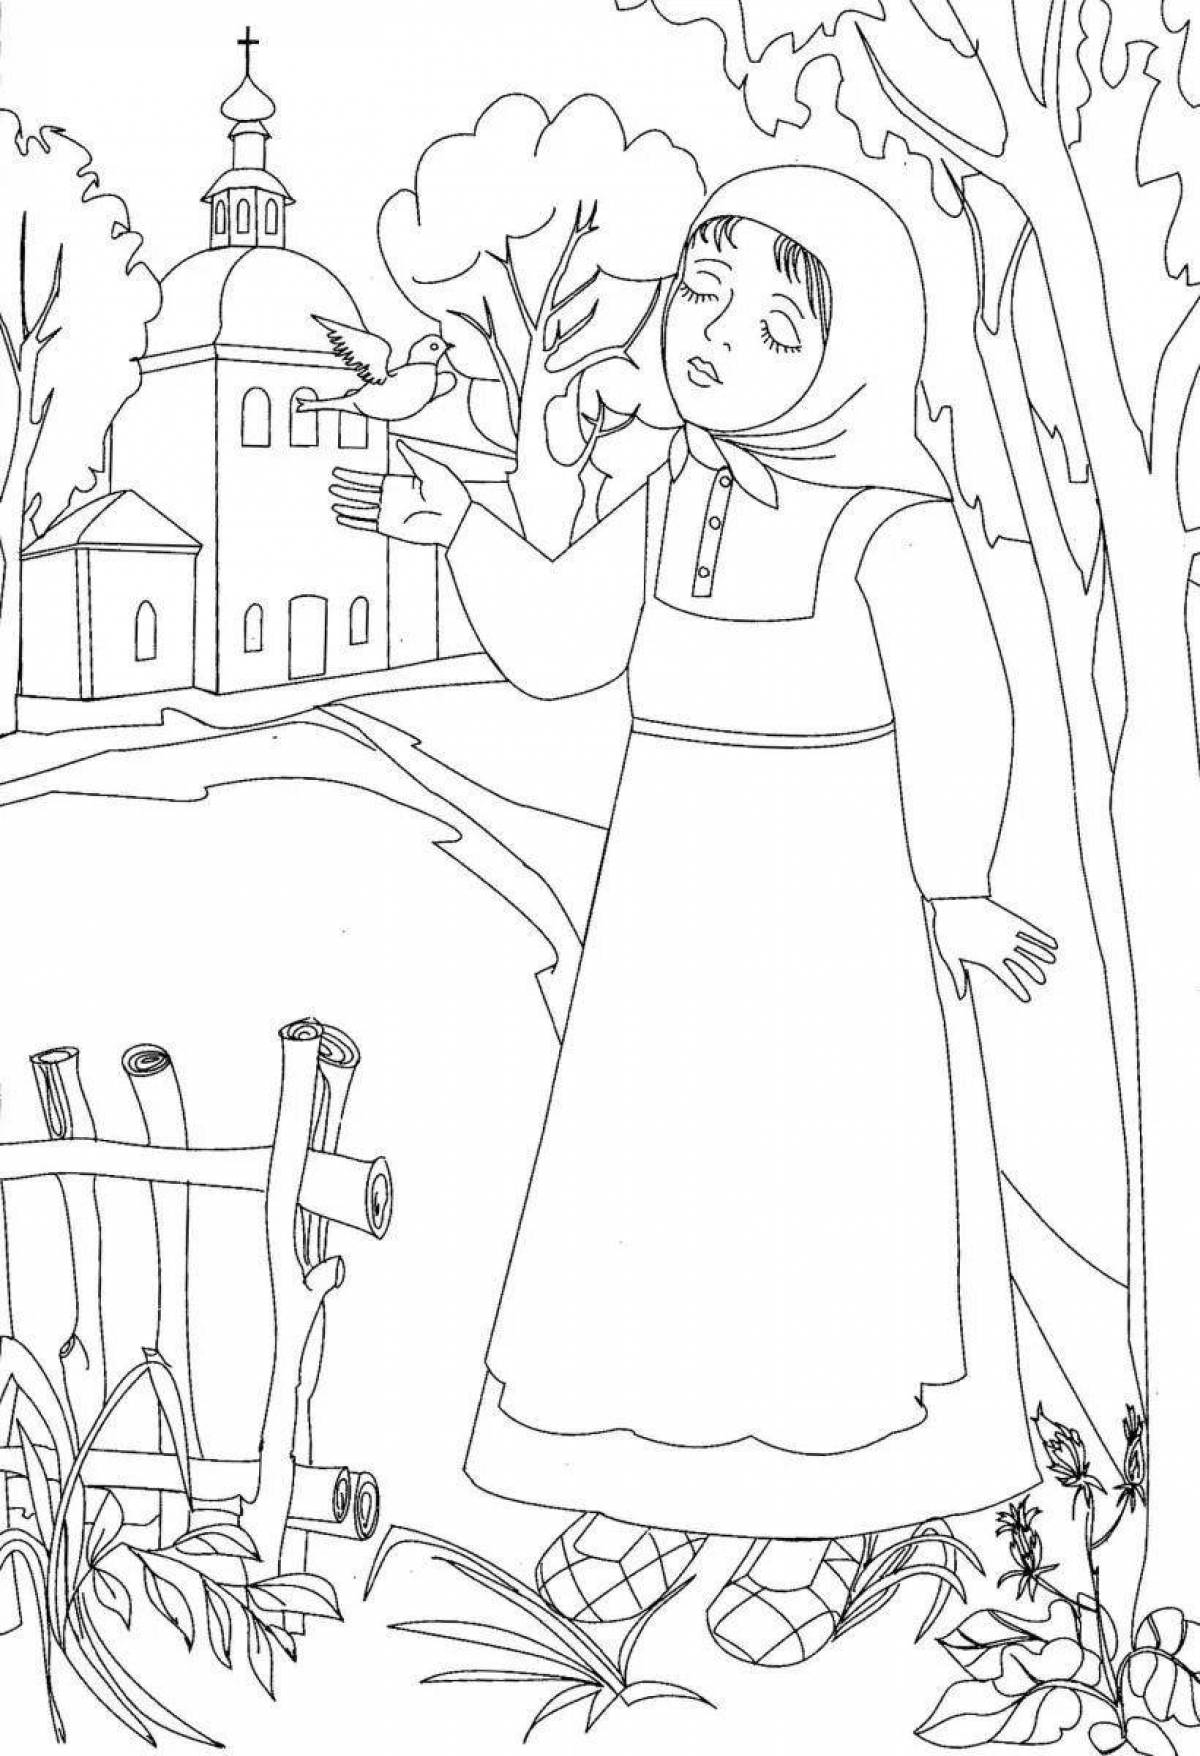 Exuberant orthodox coloring book for kids